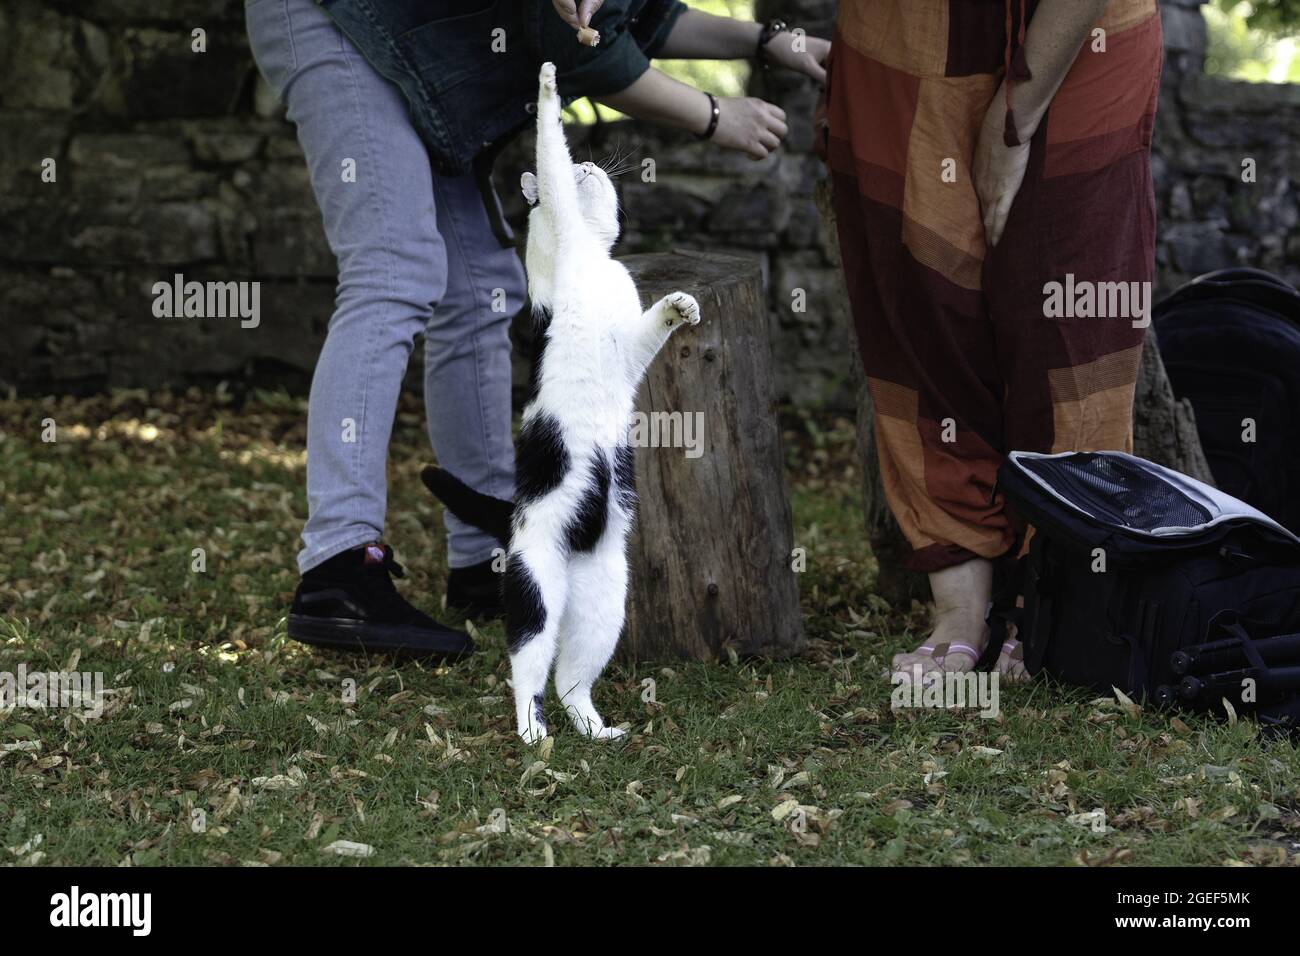 Closeup shot of a funny cat trying to catch a piece of bread in the garden Stock Photo